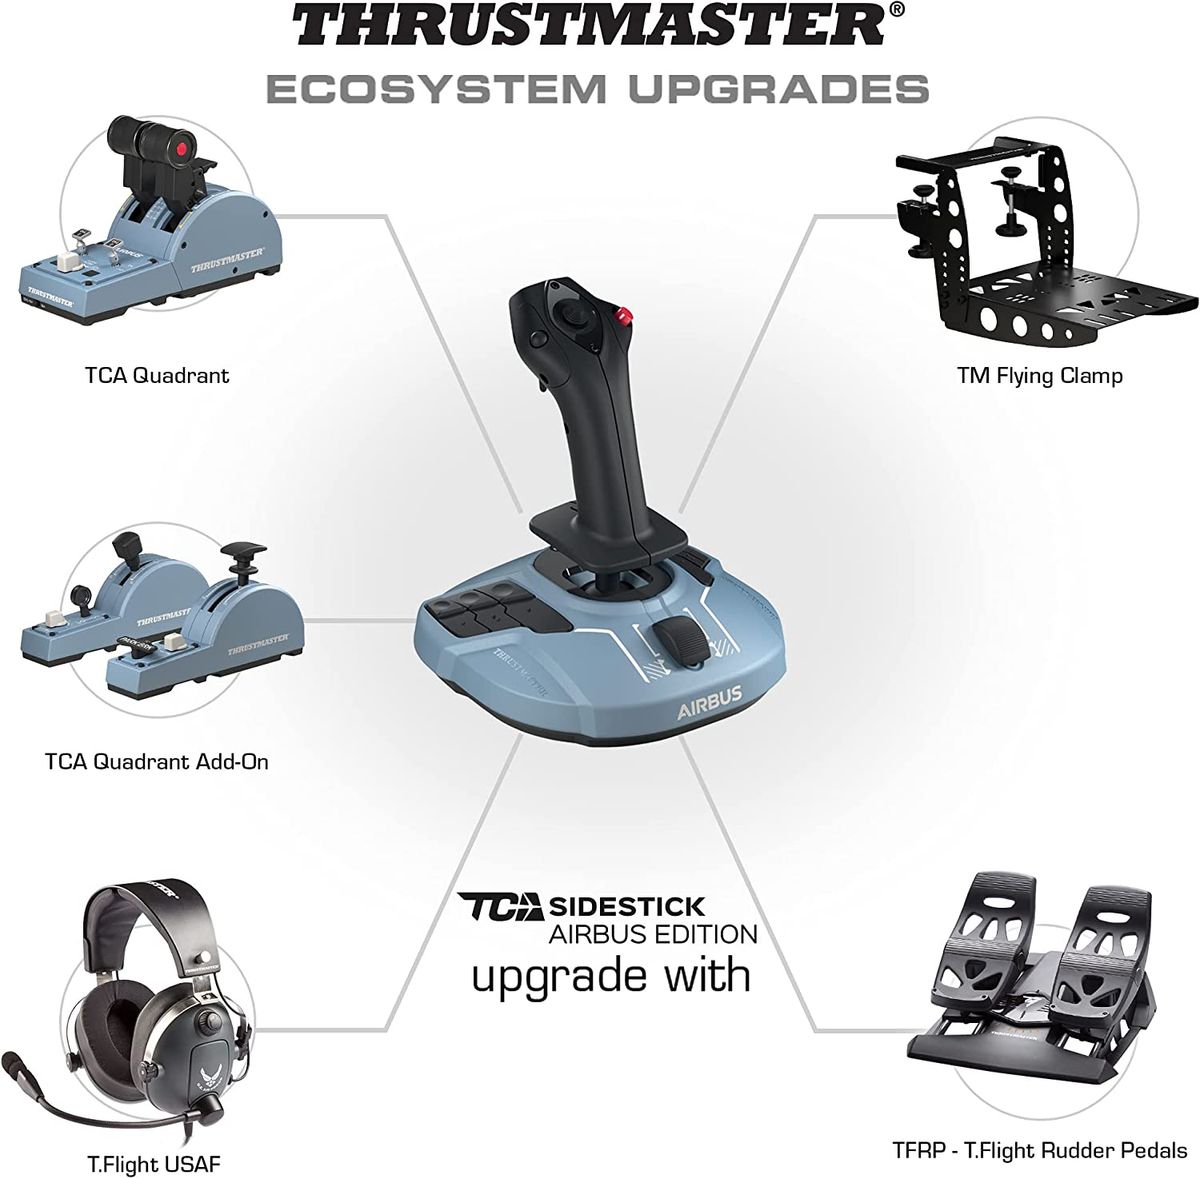 PC Built-in Joystick Magnetic Edition, Joystick, Ergonomic and Airbus Airliner Compatible Side TCA Thrustmaster Side Function, of Technology Ambidextrous, Airbus